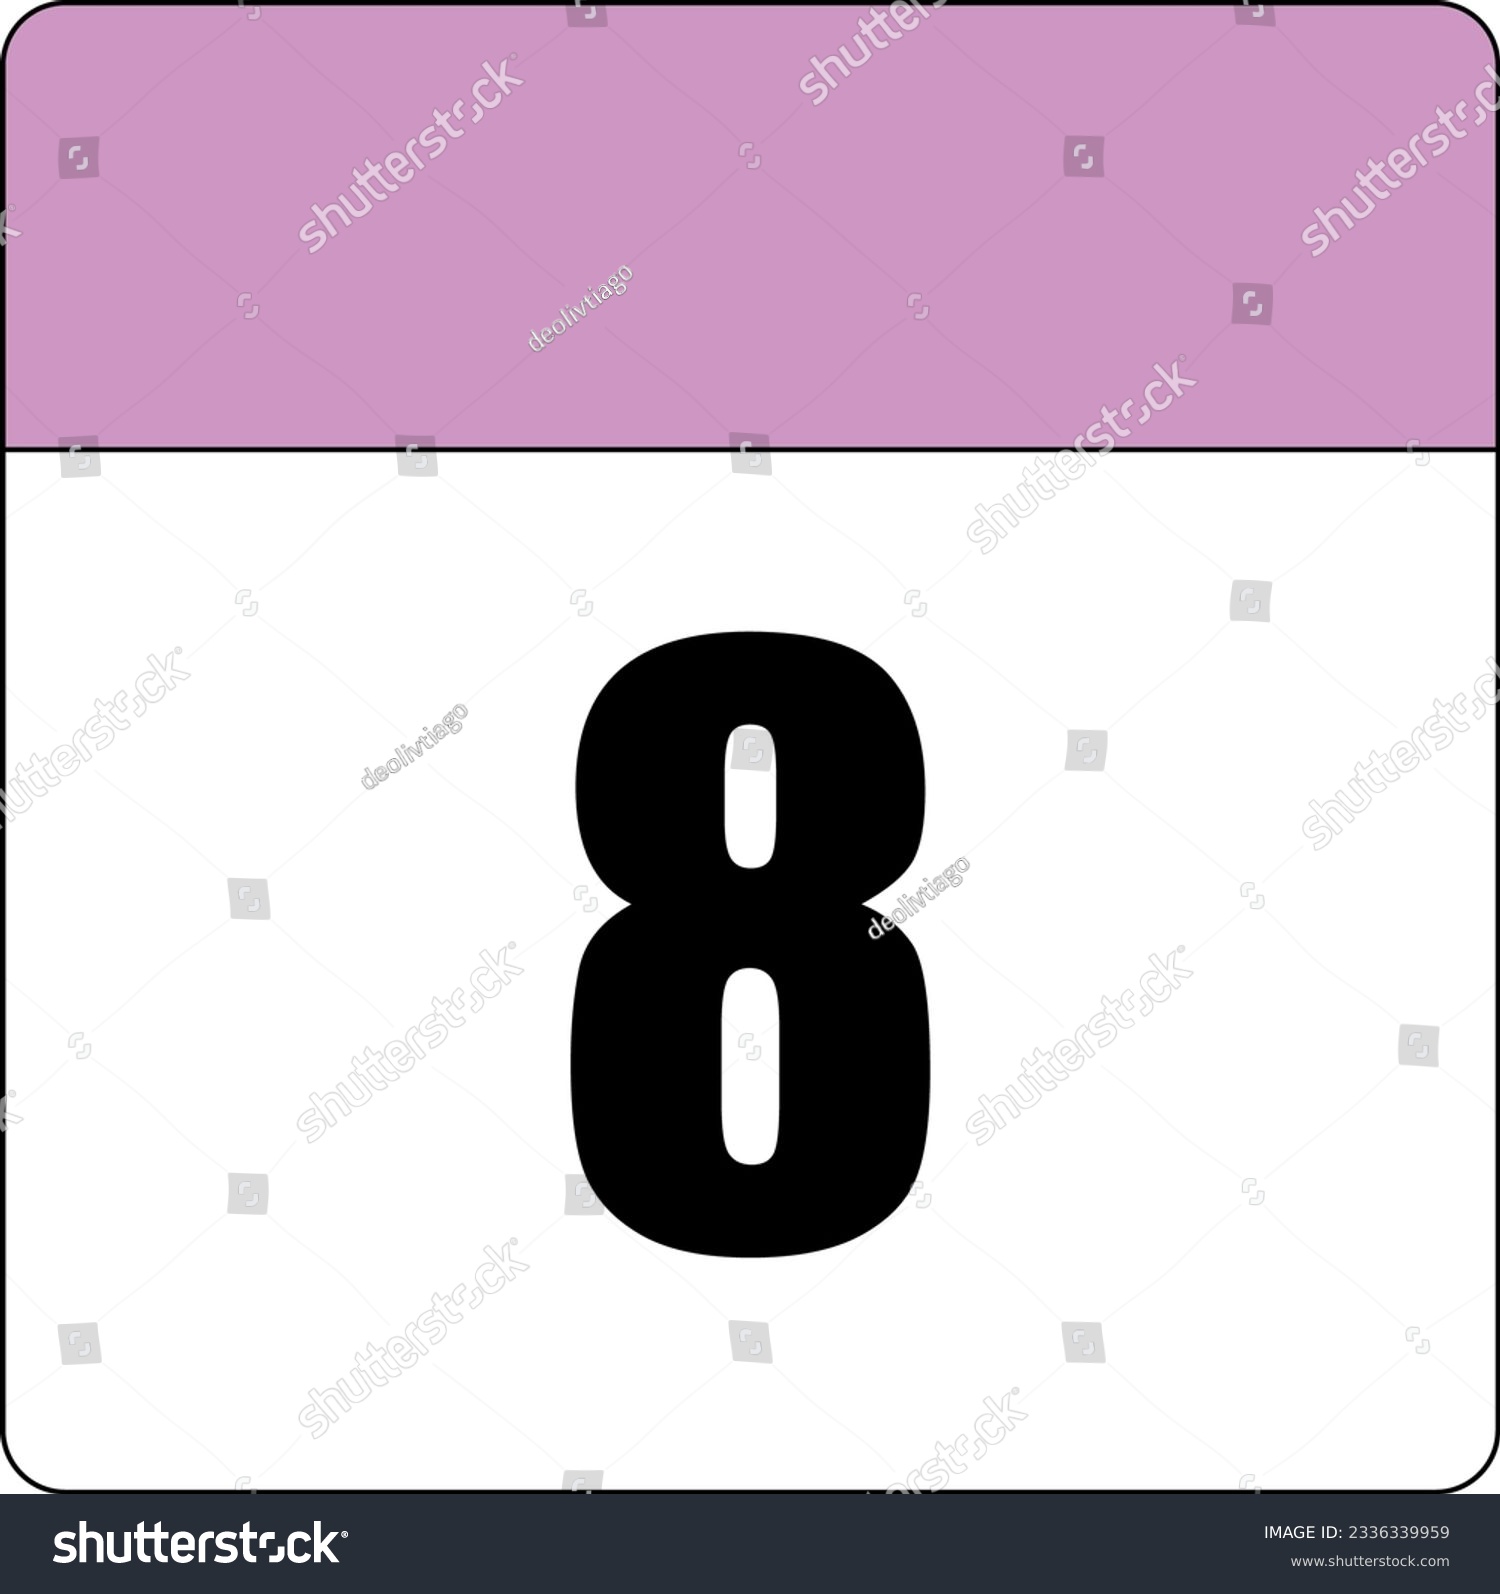 SVG of simple calendar icon with pink header and white background showing 8th day number eight svg